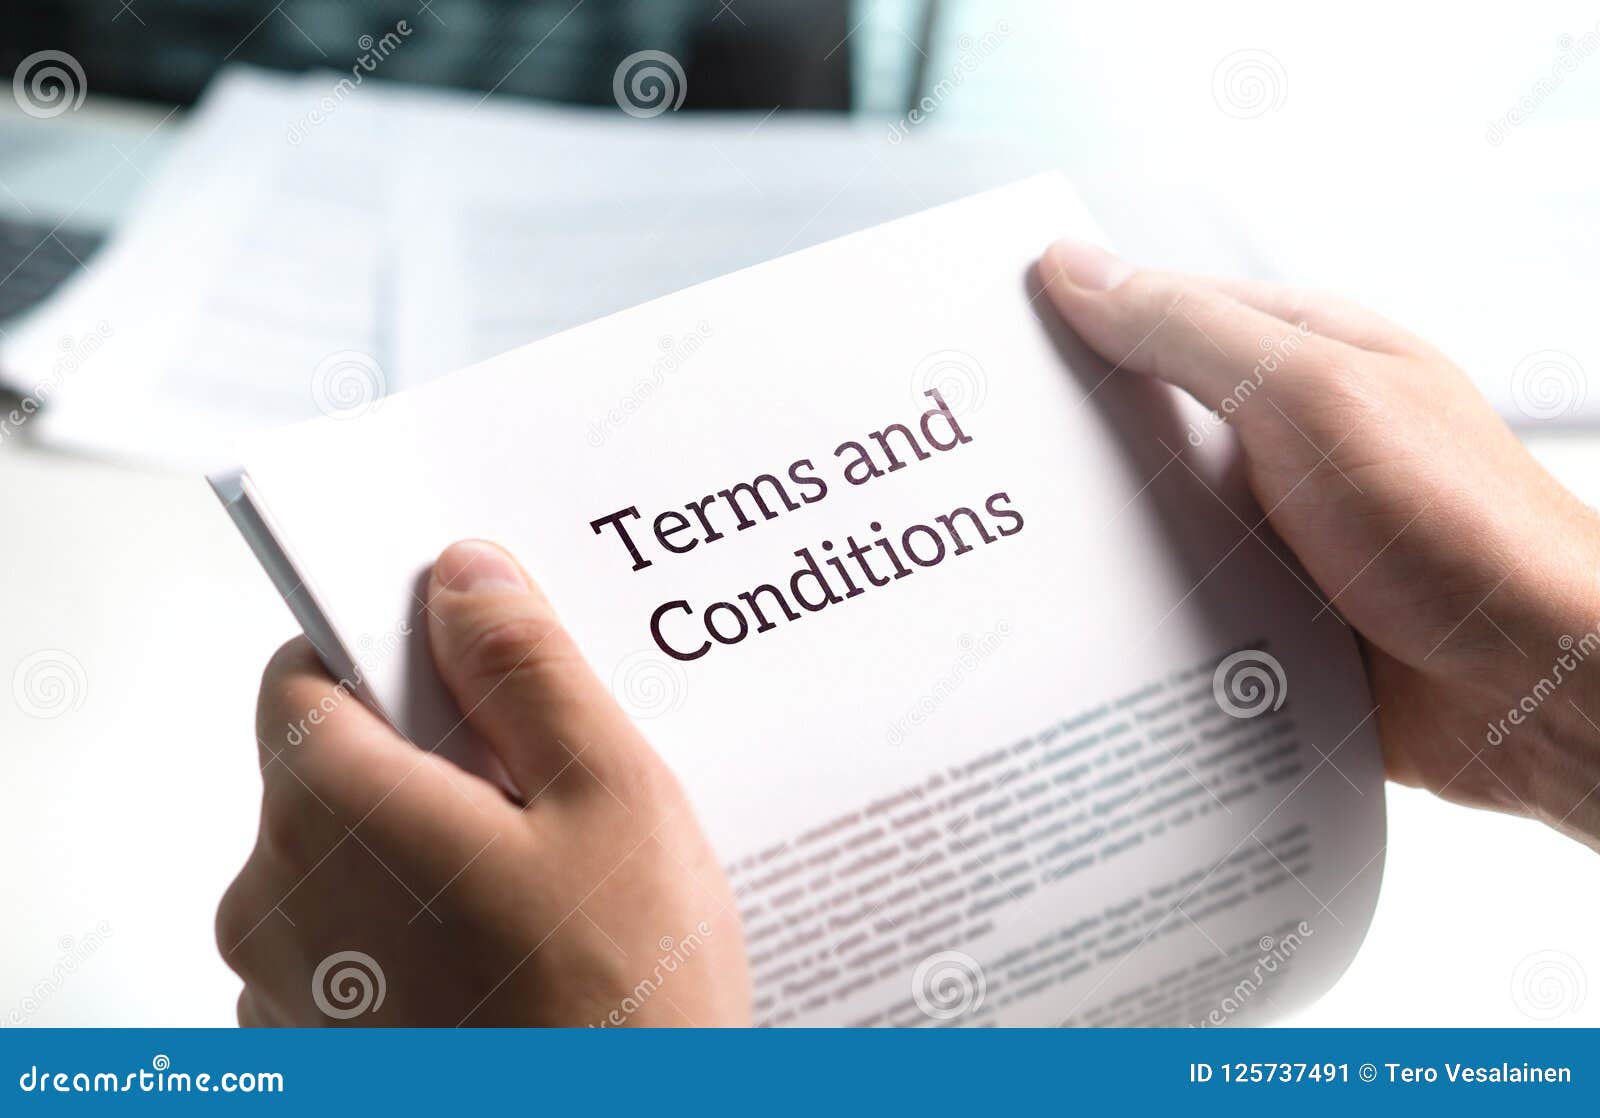 terms and conditions text in legal agreement or document.